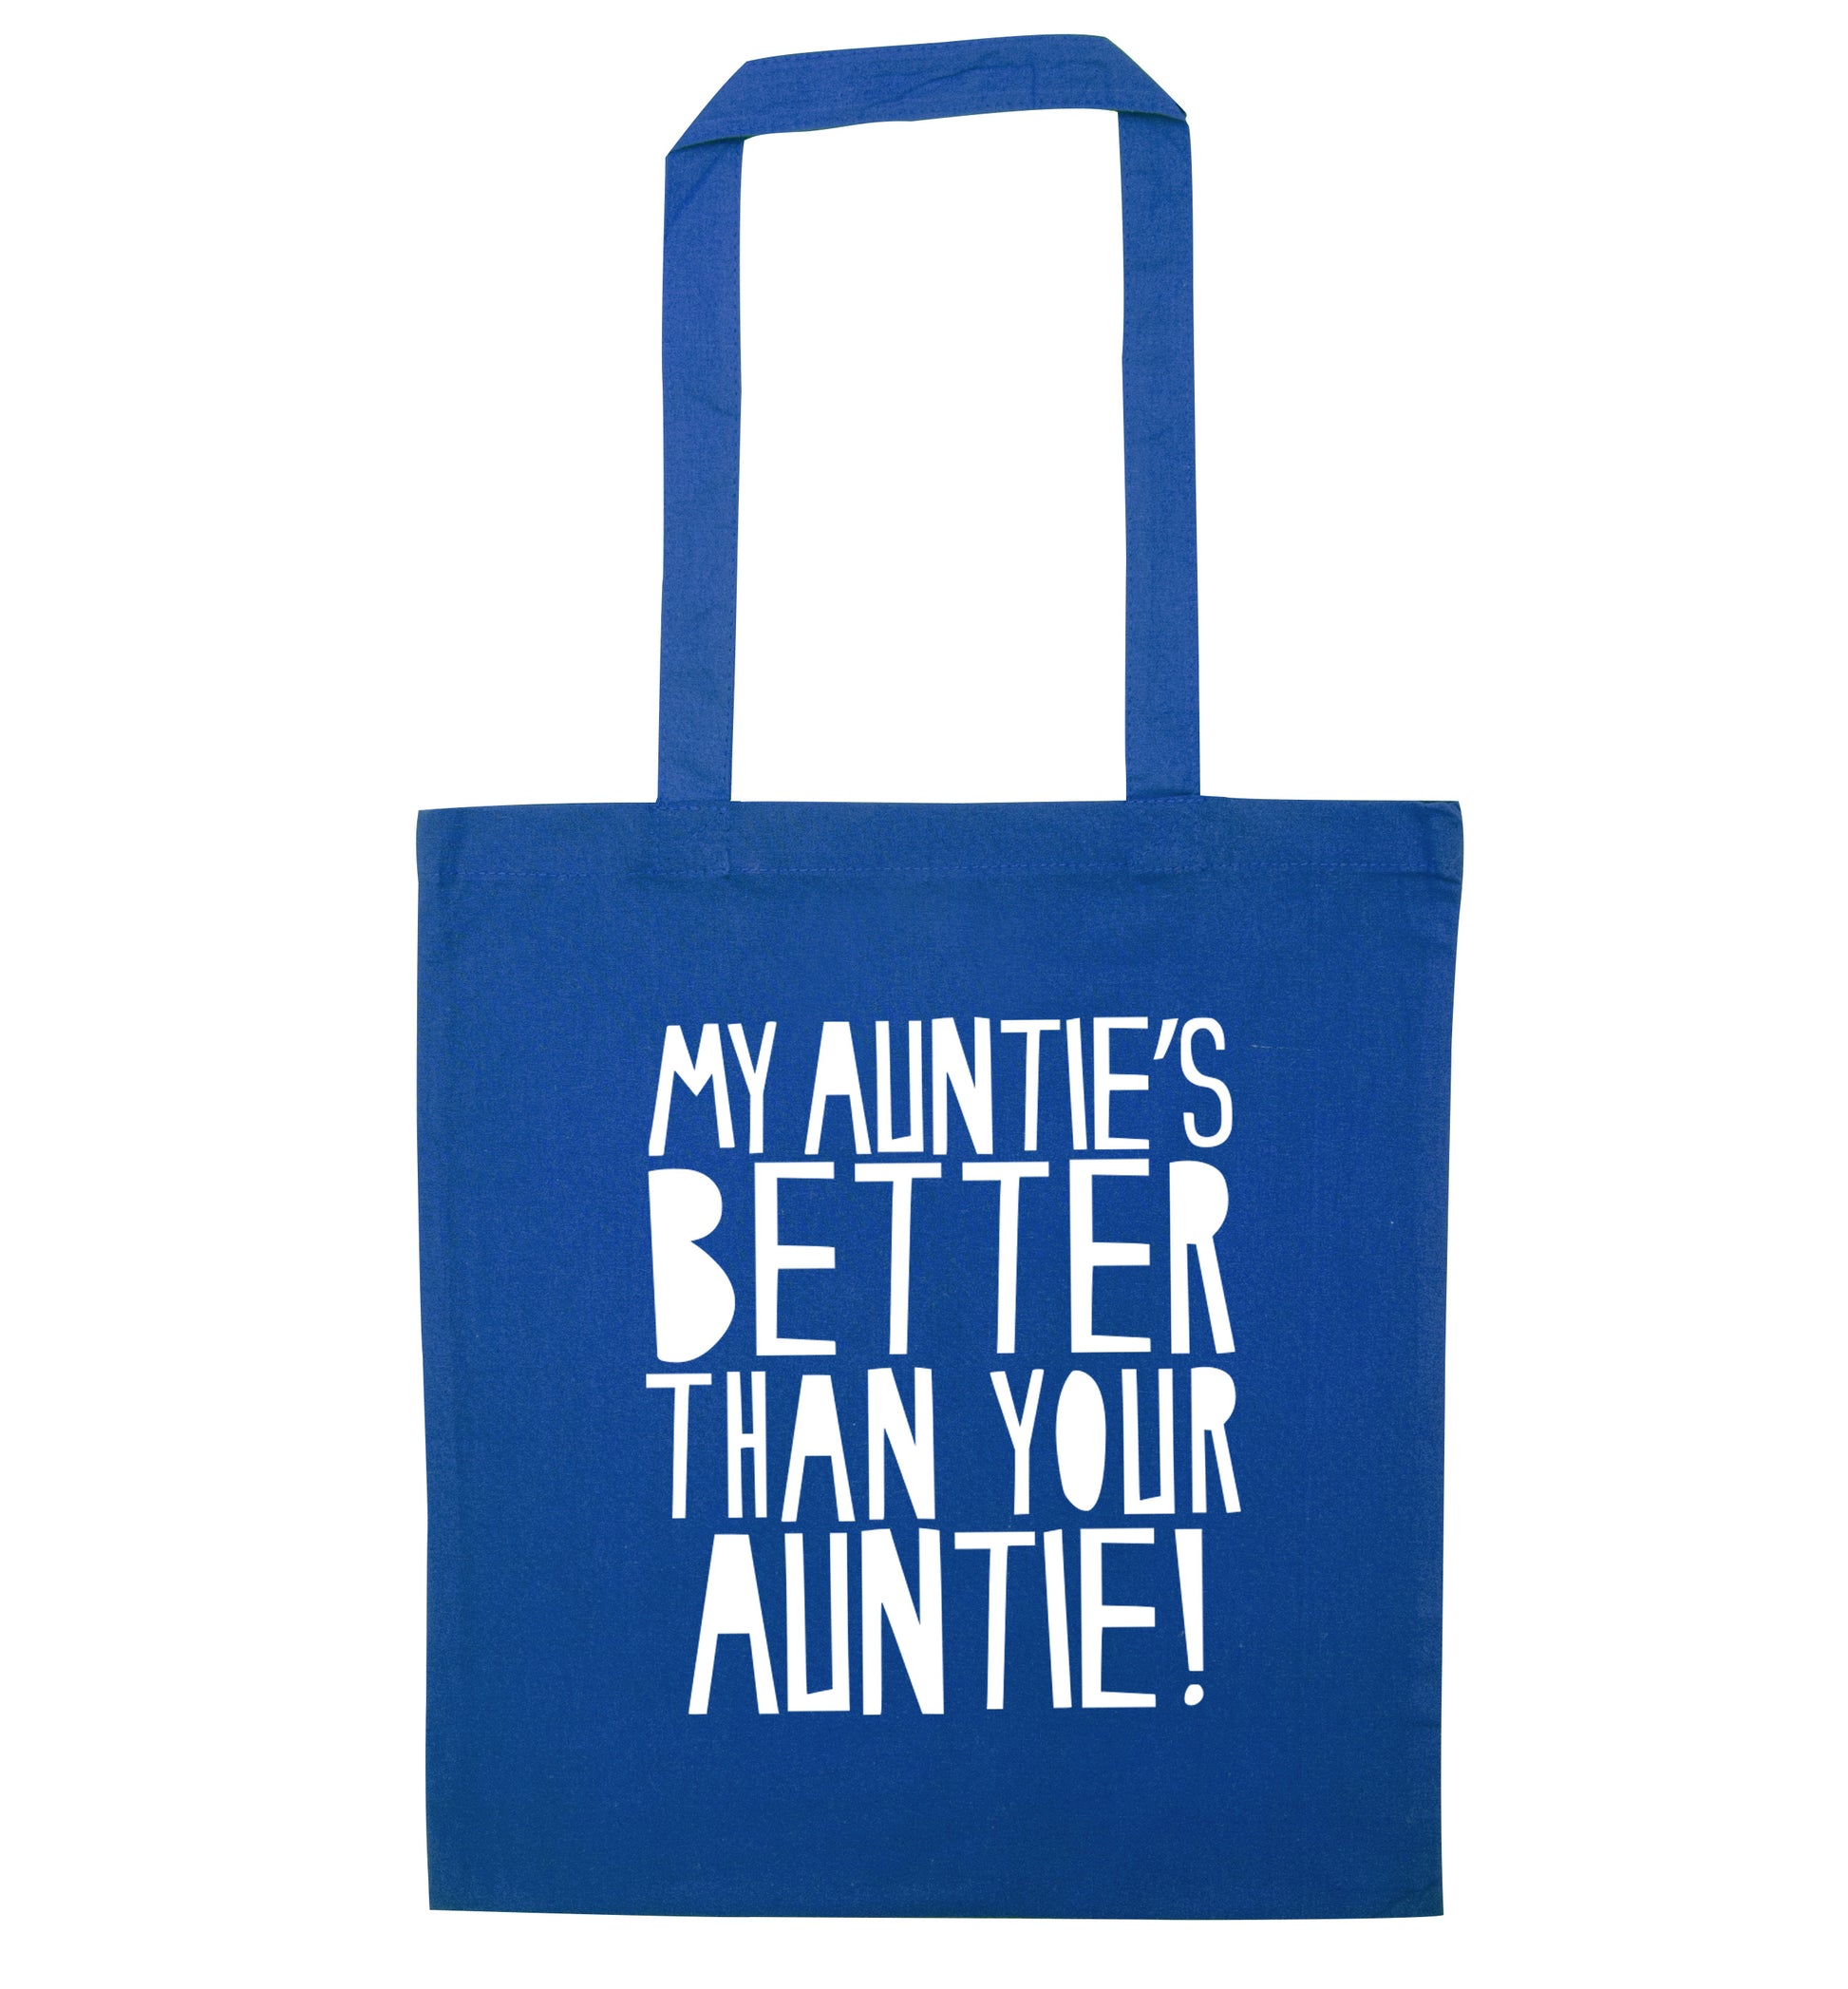 My auntie's better than your auntie blue tote bag